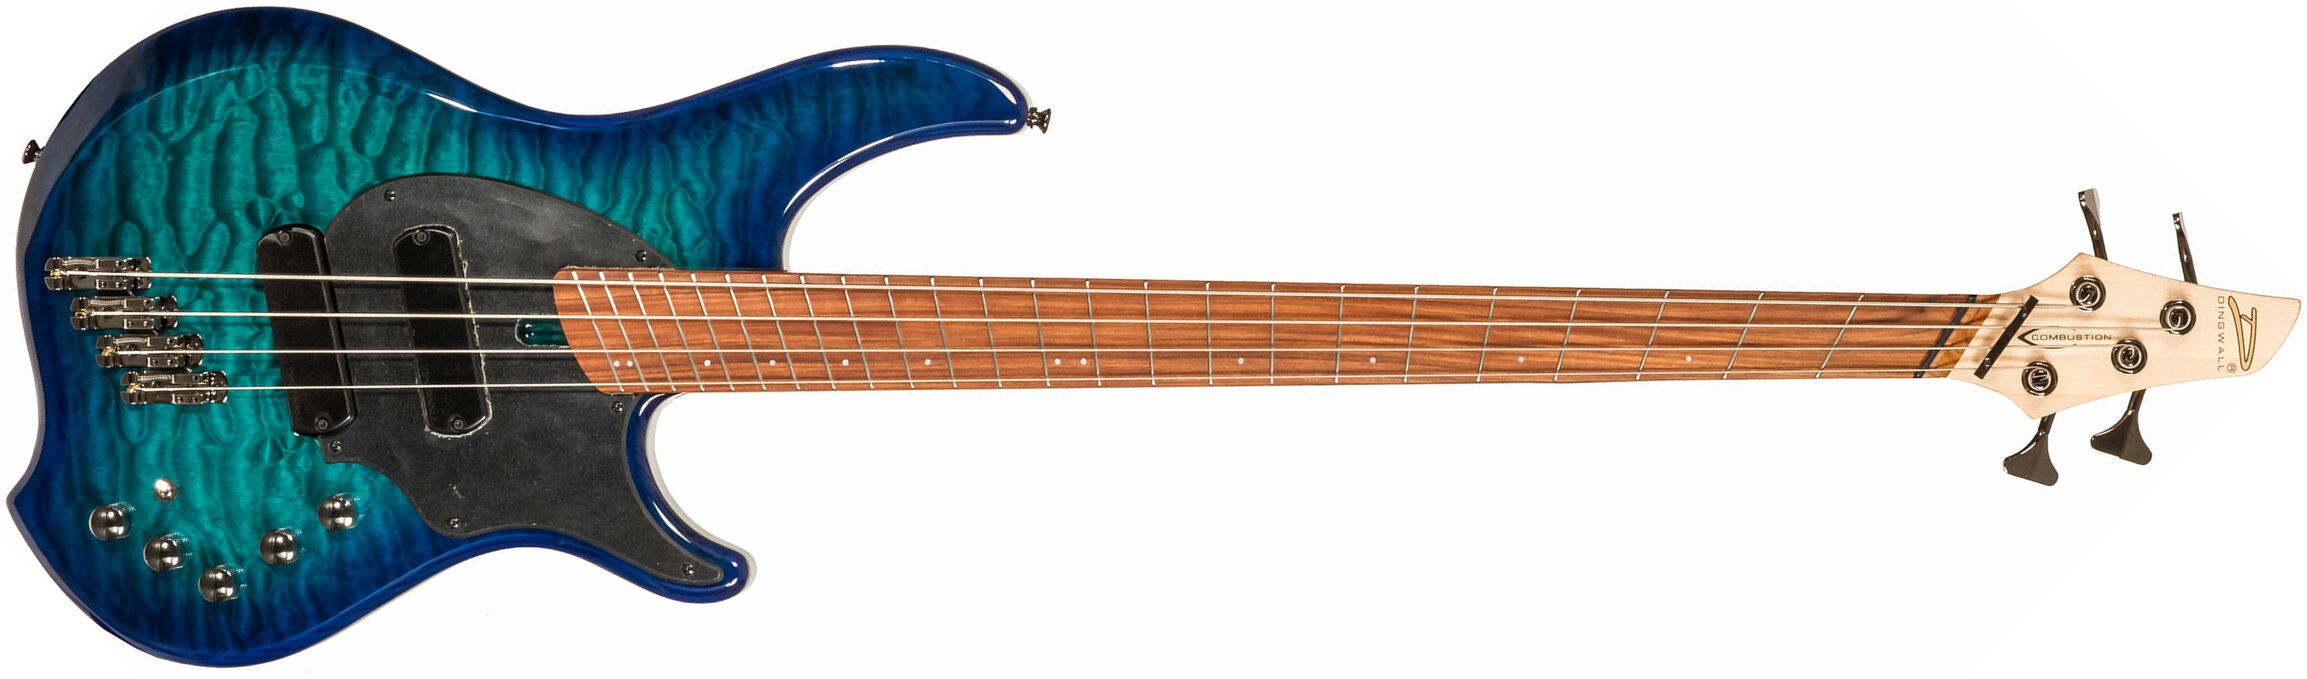 Dingwall Combustion Cb2 4c 2pu Active Pf - Whalepool Burst - Solid body electric bass - Main picture